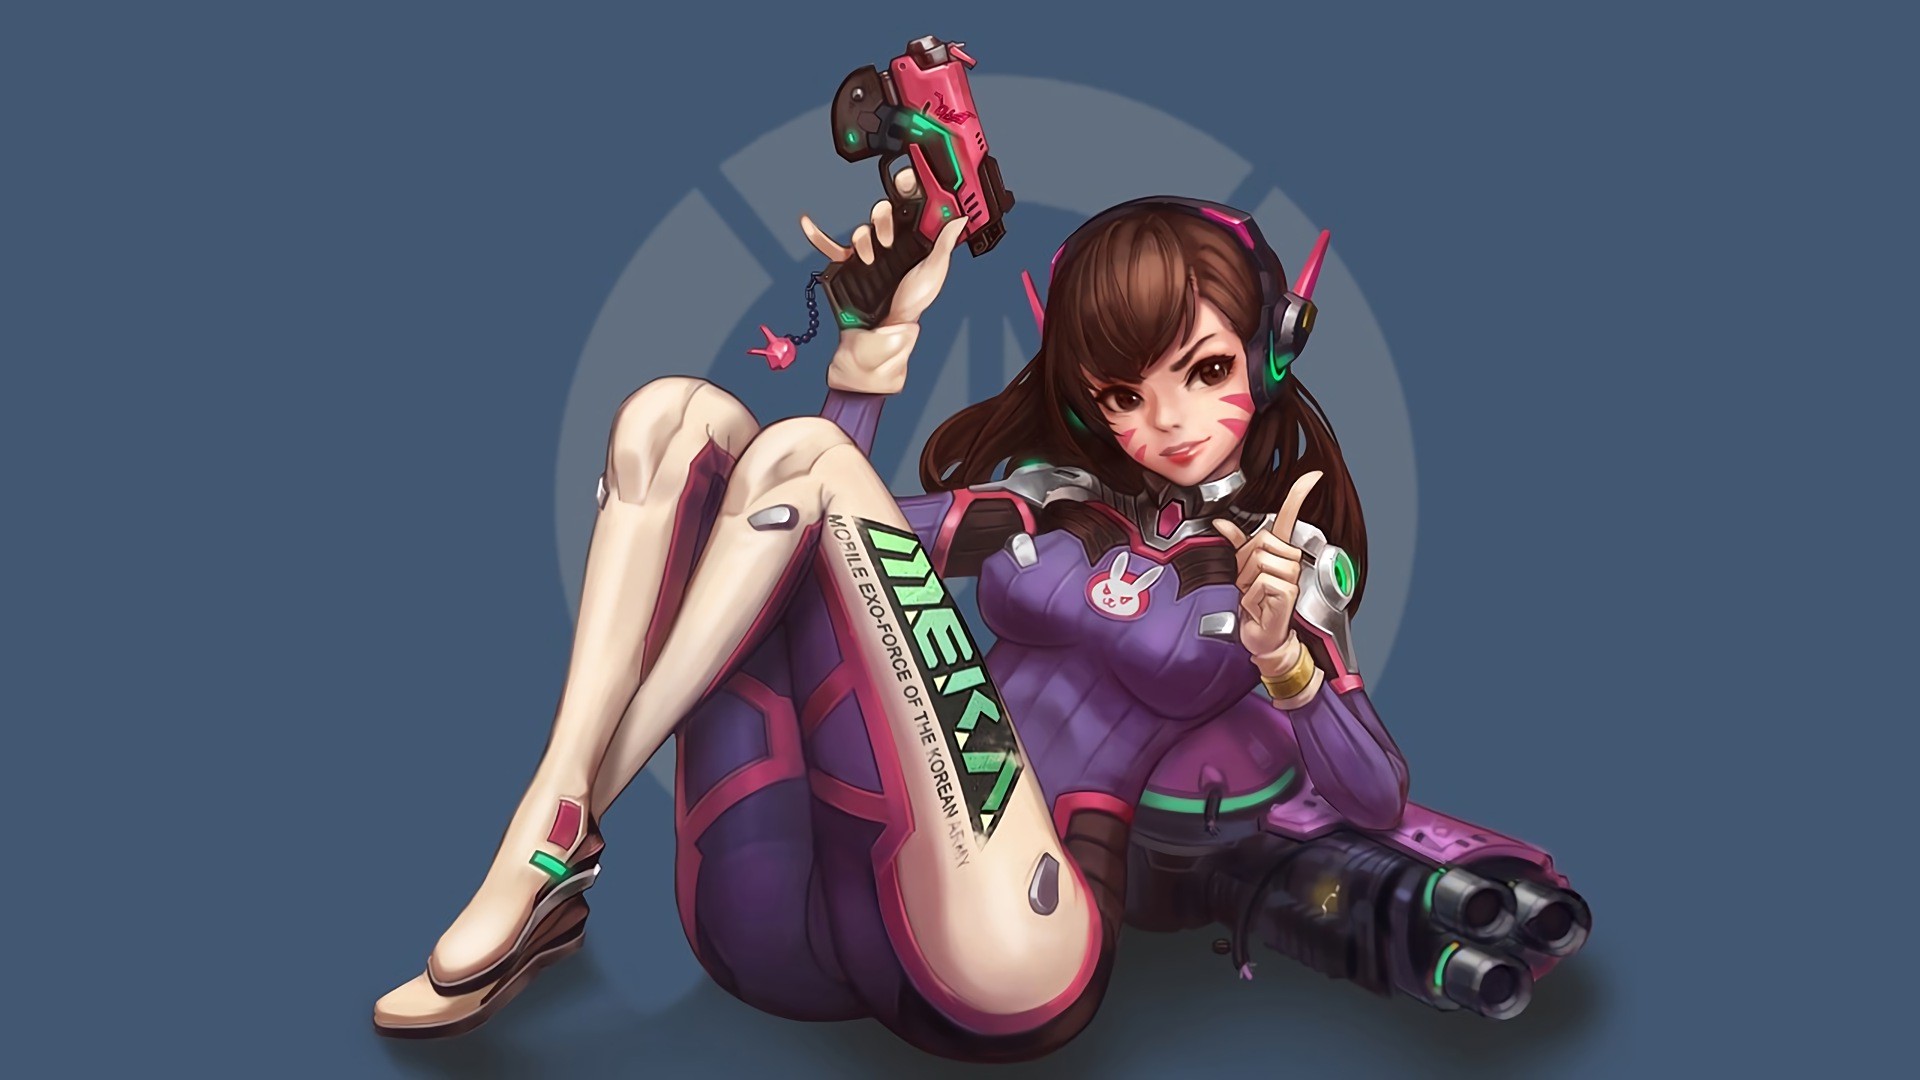 1920x1080 Dva Sexy Gamegirl Overwatch is a high definition desktop wallpaper from our  collection of free background